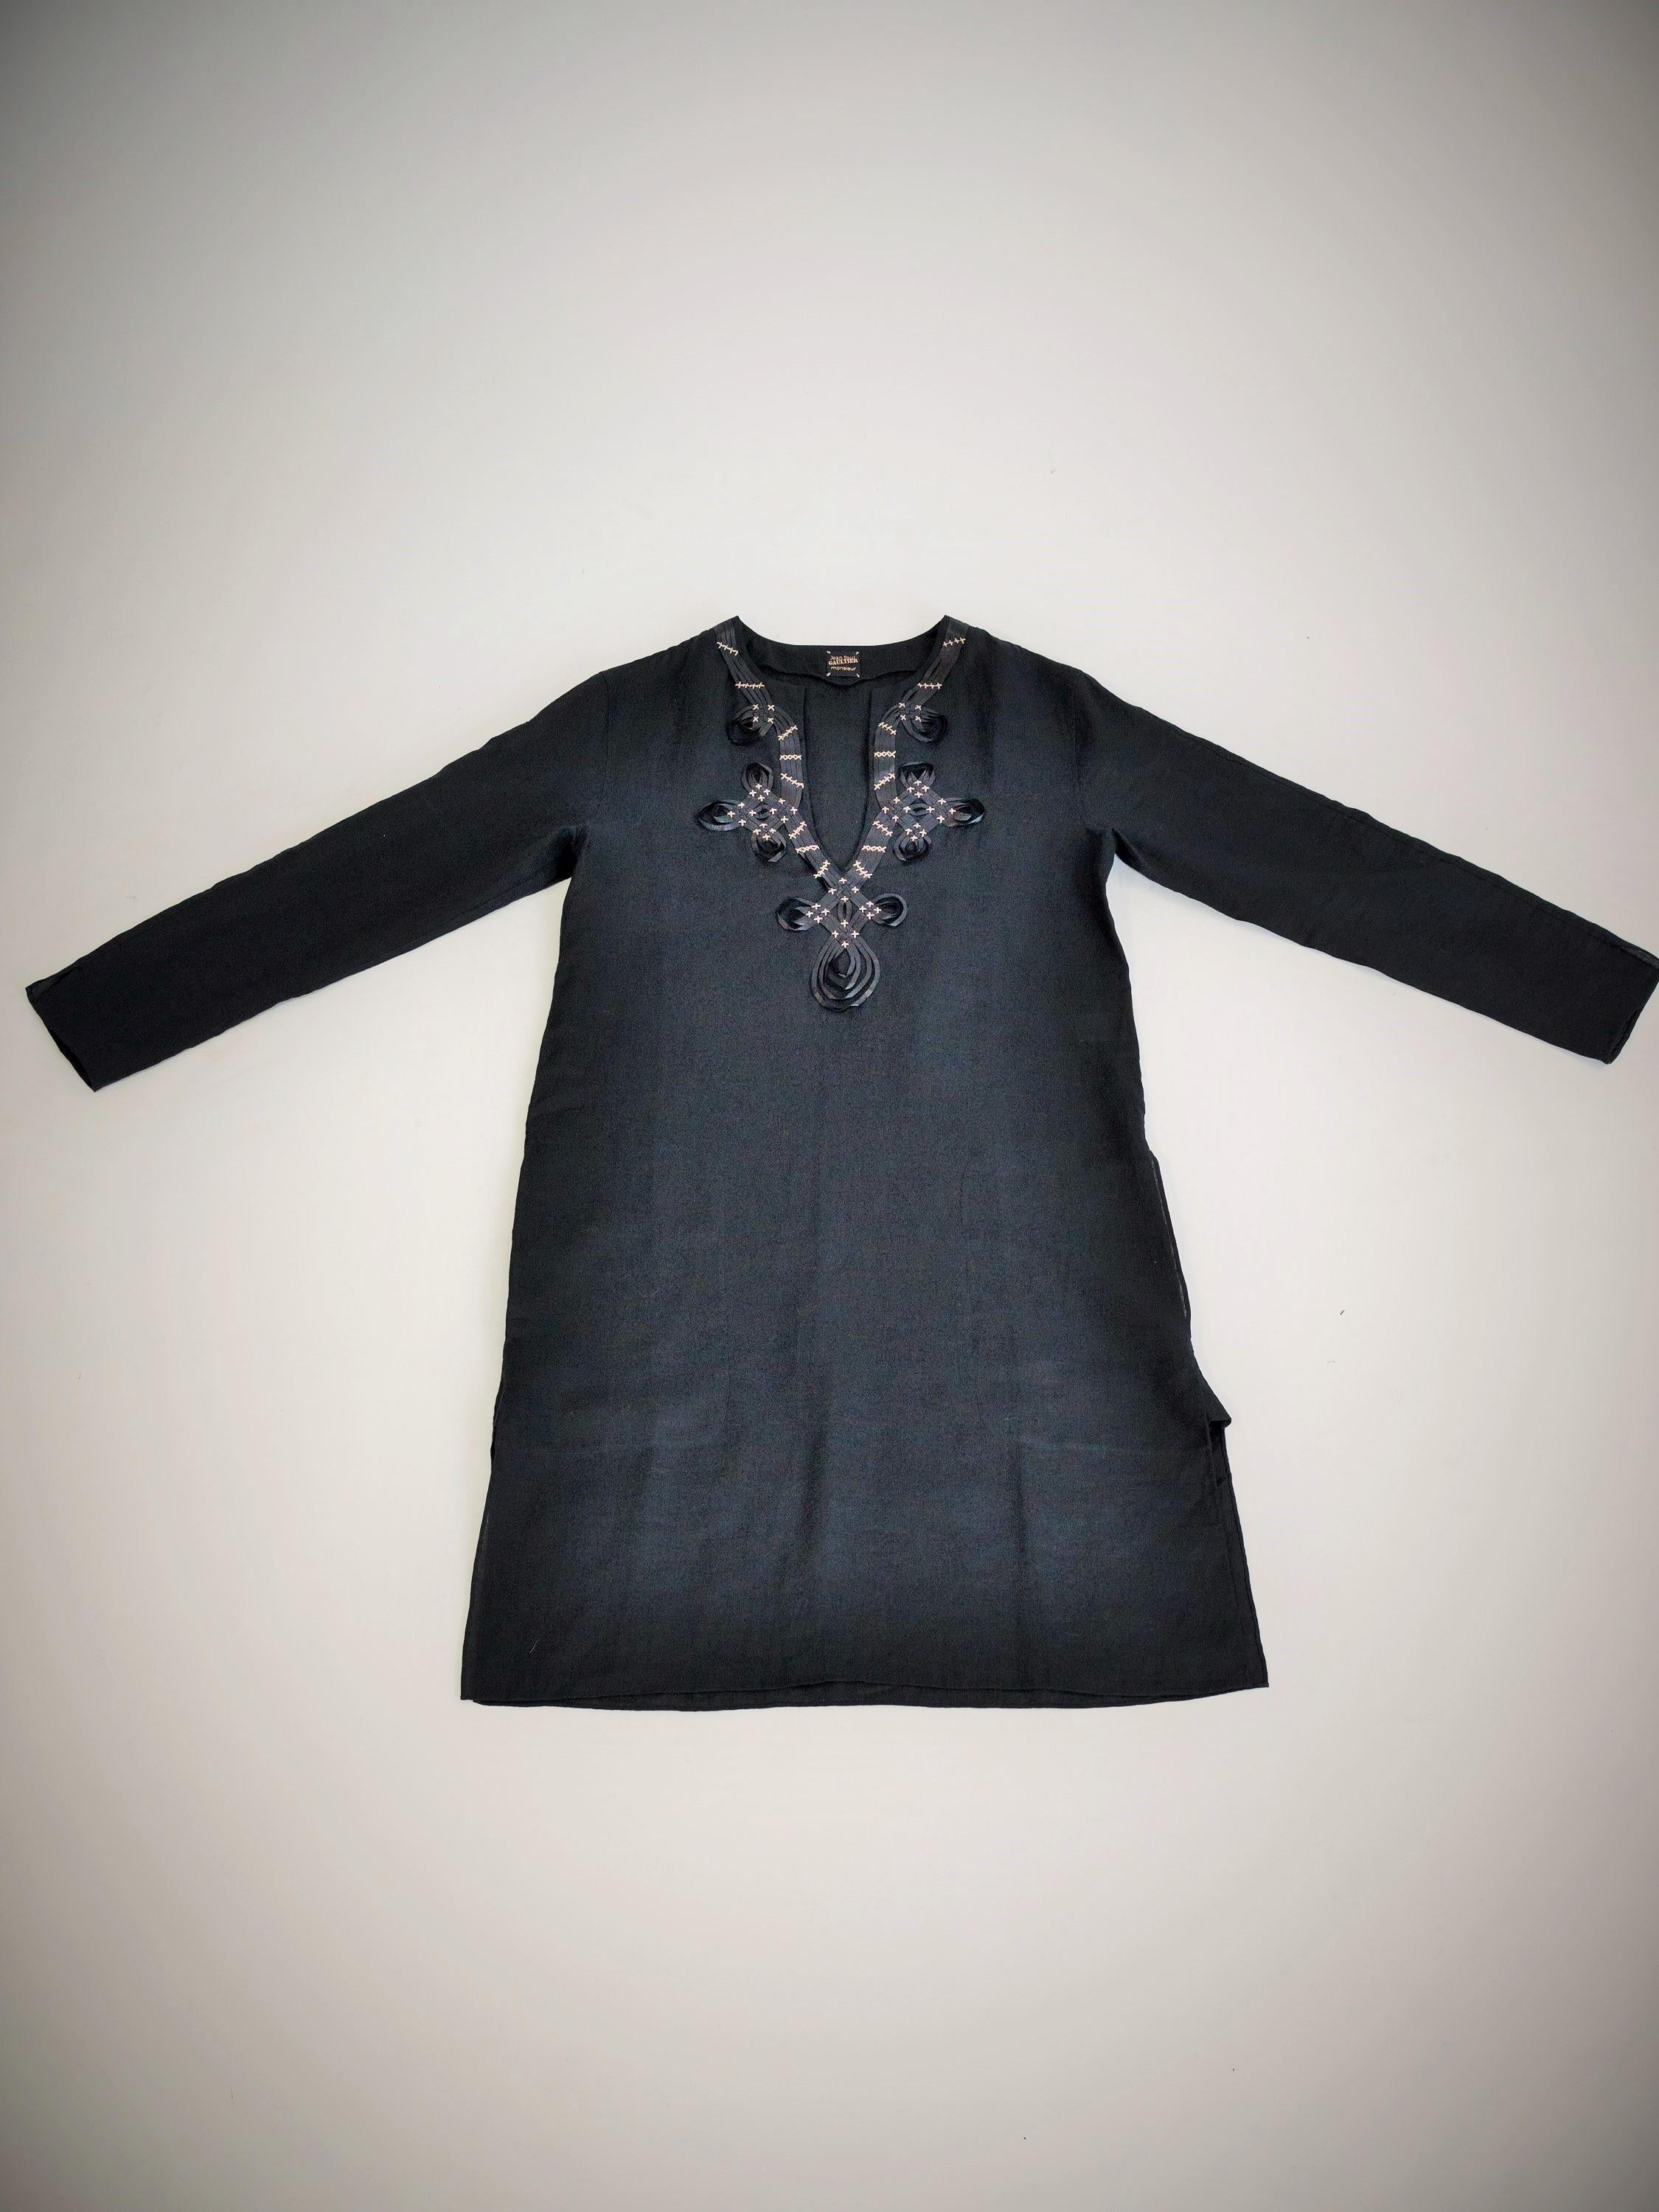 Circa 2000

France

Beautiful orientalist blouse in black linen embroidered by Jean-Paul Gaultier Monsieur dating from the 2000s. Free inspiration or a nod from the designer to the cut of a Djellaba or the length of an Indian Kurta. Crew neck blouse